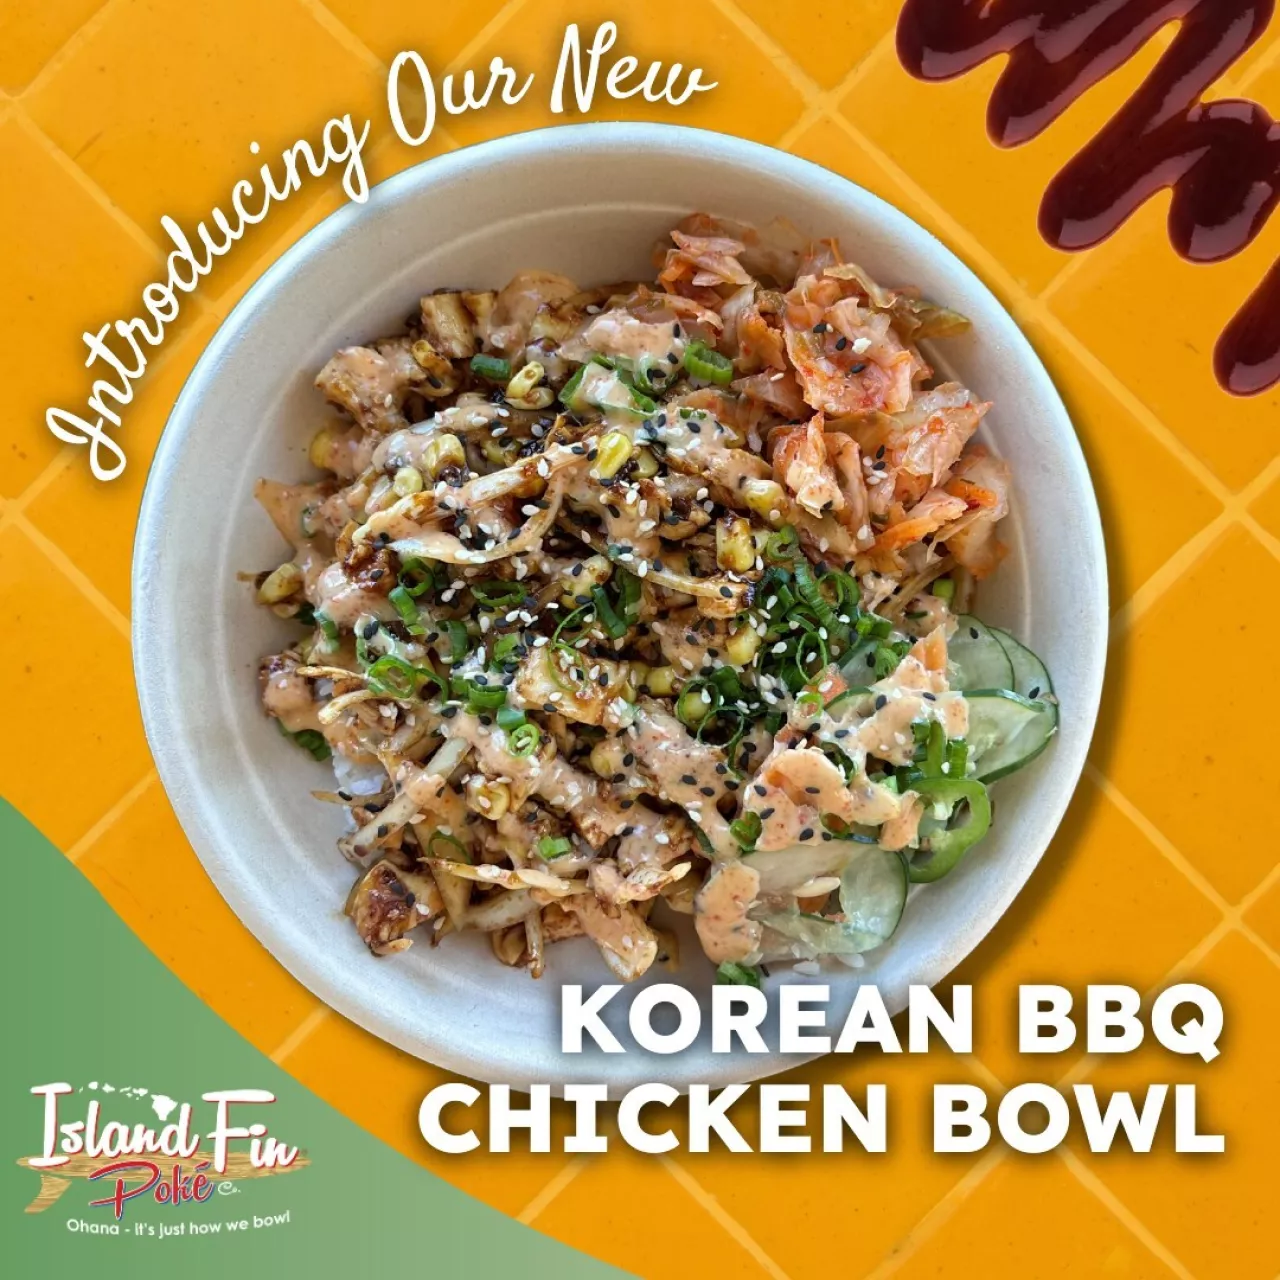 Island Fin Poké Co. Introduces Korean BBQ Chicken Bowl For a Limited Time to Broaden Menu for Guests